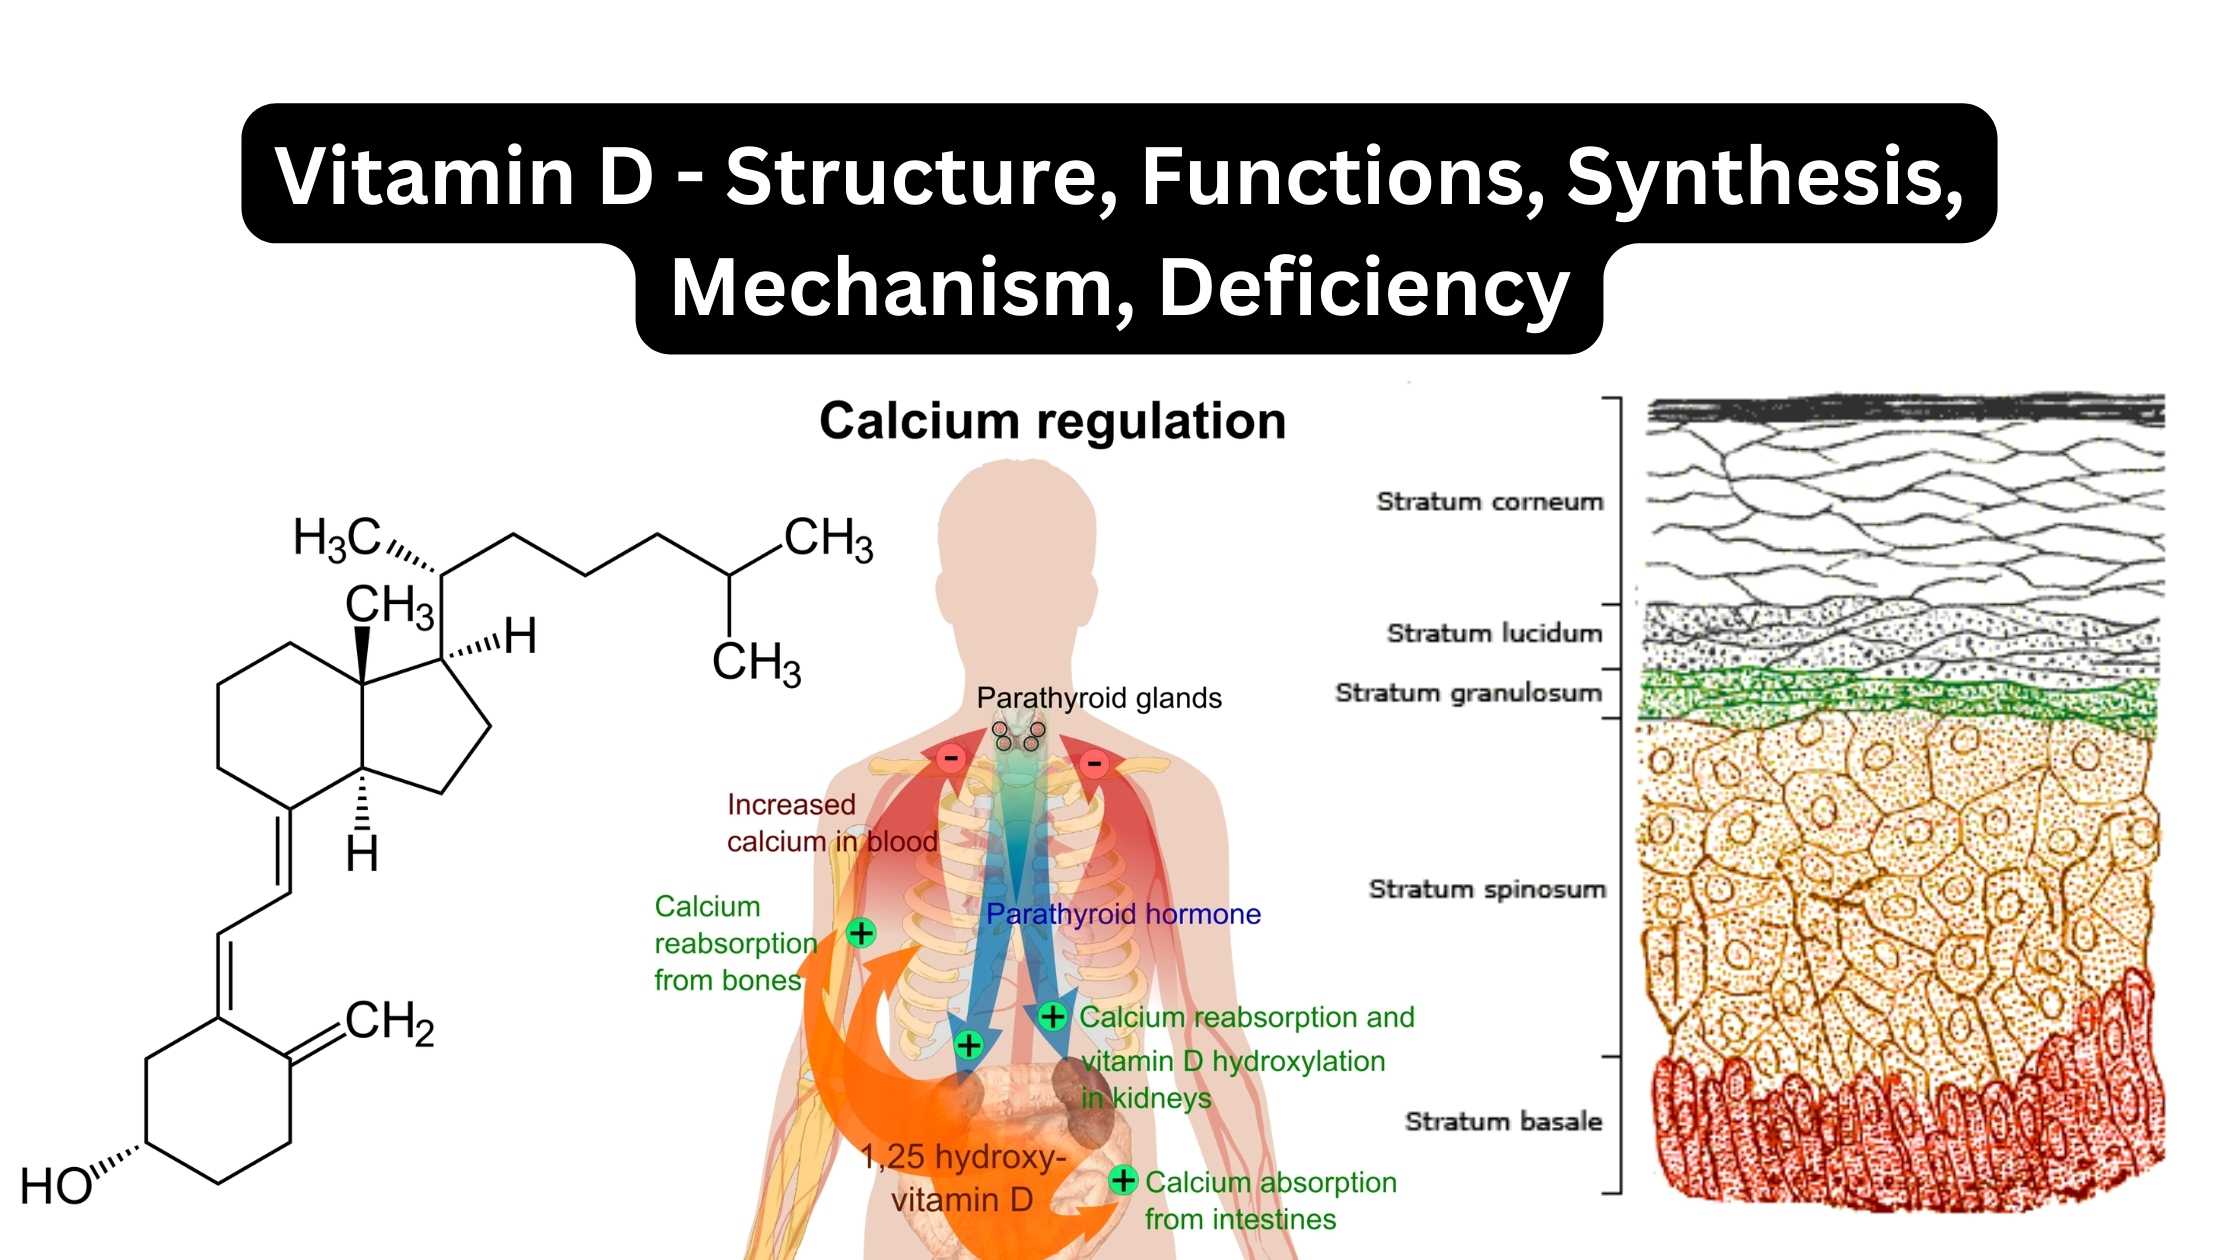 Vitamin D - Structure, Functions, Synthesis, Mechanism, Deficiency